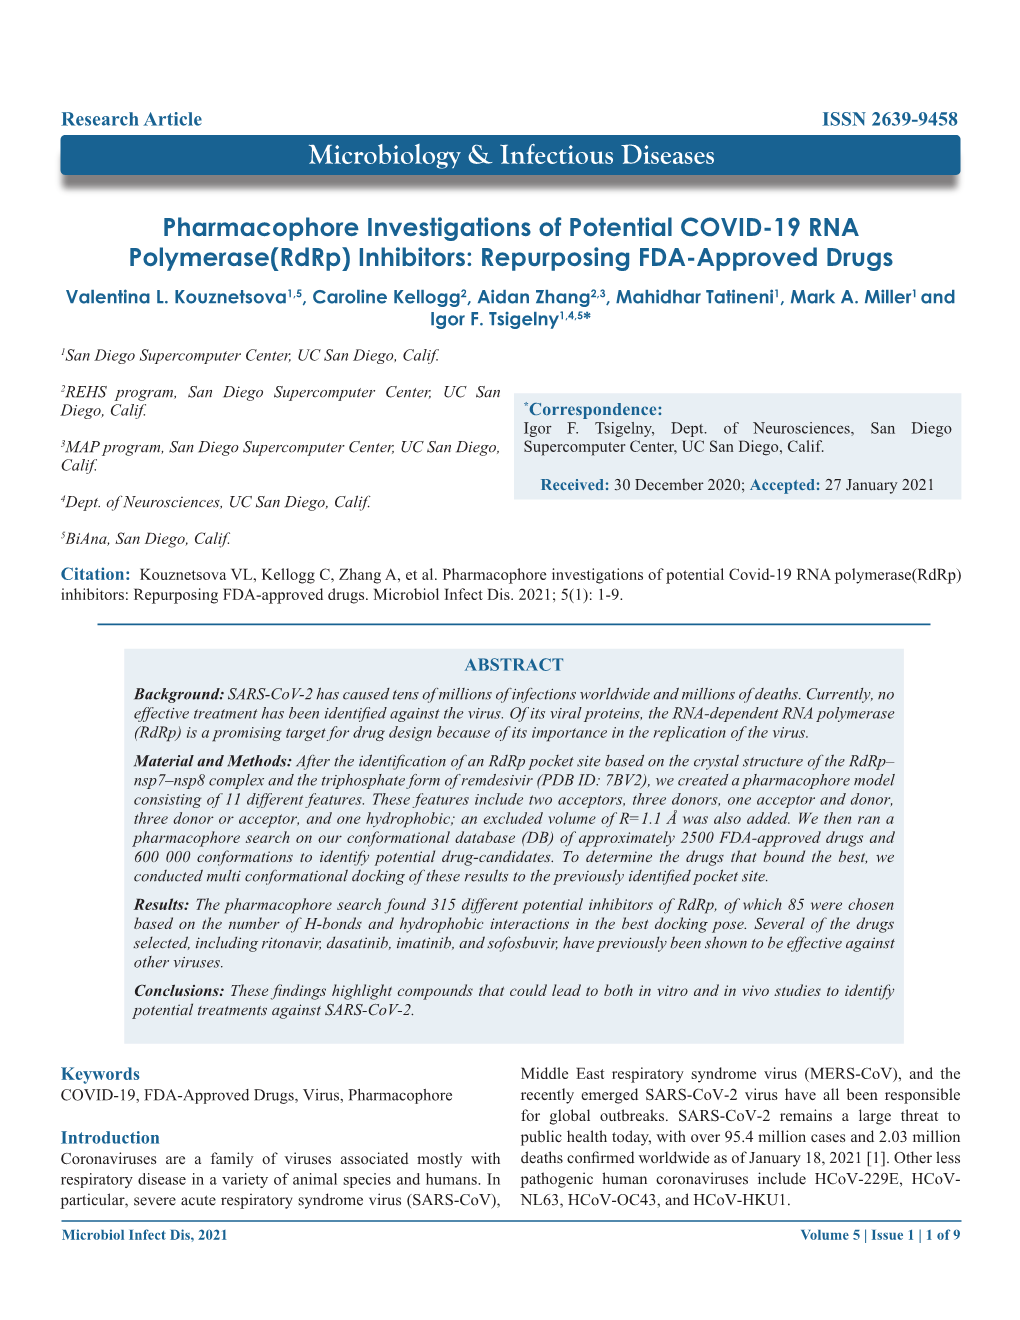 Pharmacophore Investigations of Potential COVID-19 RNA Polymerase(Rdrp) Inhibitors: Repurposing FDA-Approved Drugs Valentina L